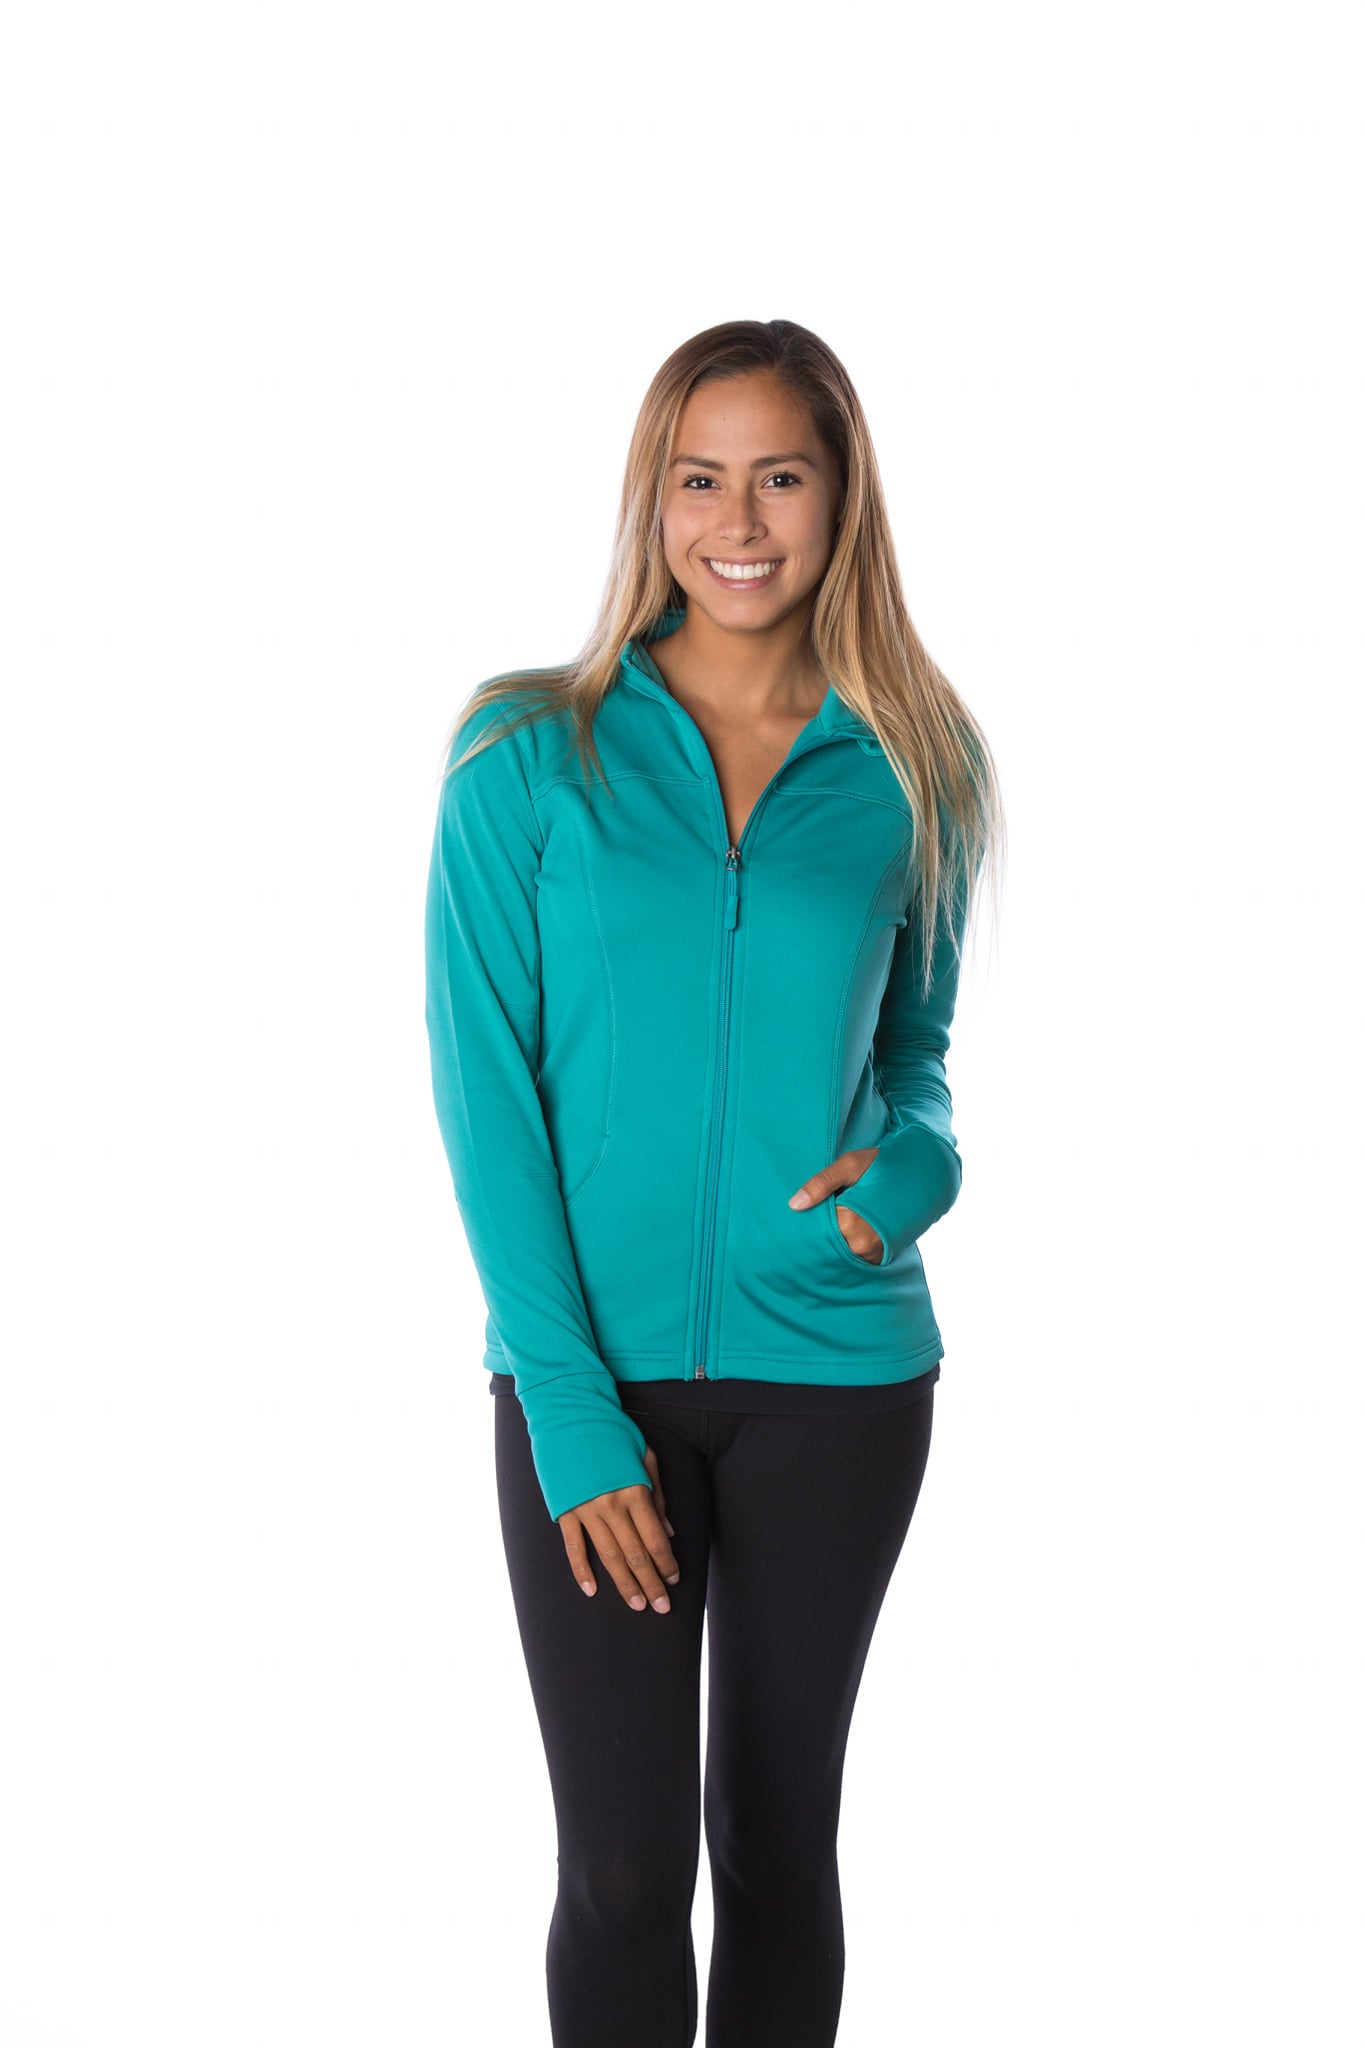 colorskin Womens Zip Up Bbl Jacket Lightweight Cropped Athletic Jacket  Track Gym Workout Jackets for Running Yoga Hiking(Deep Grass Green,X-Small)  at  Women's Clothing store